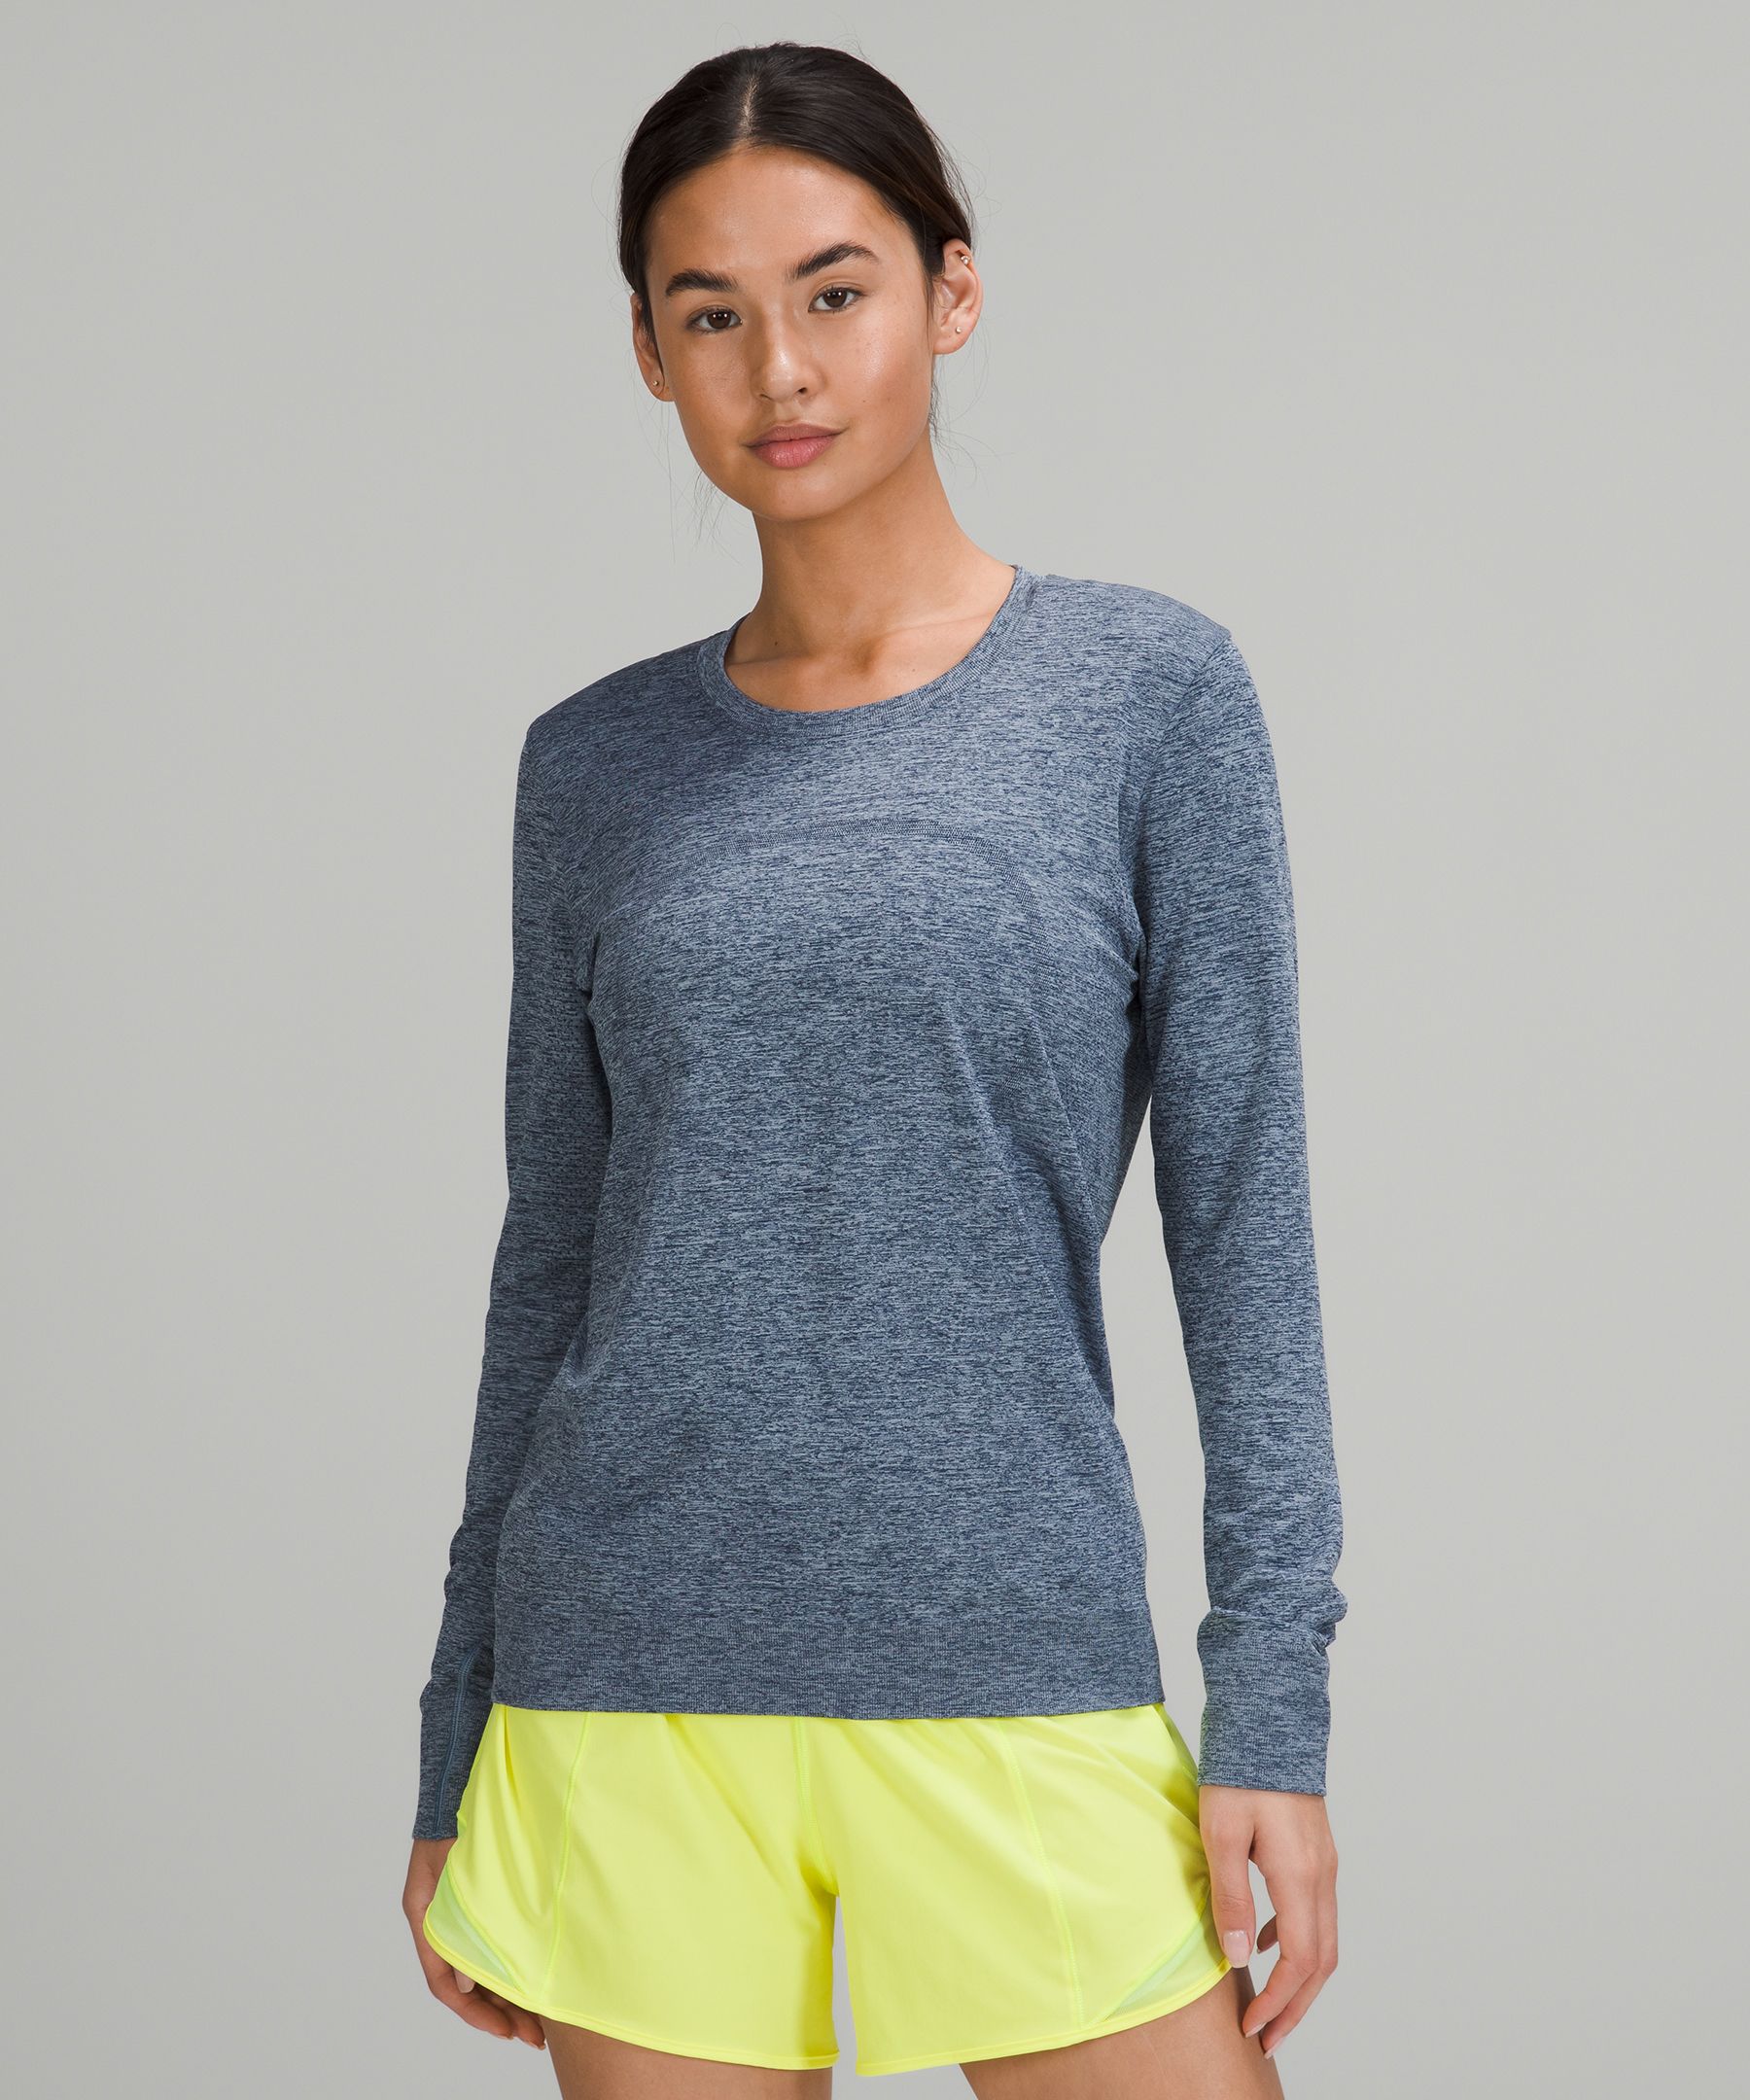 Lululemon Swiftly Relaxed-fit Long Sleeve Shirt In True Navy/blue Linen